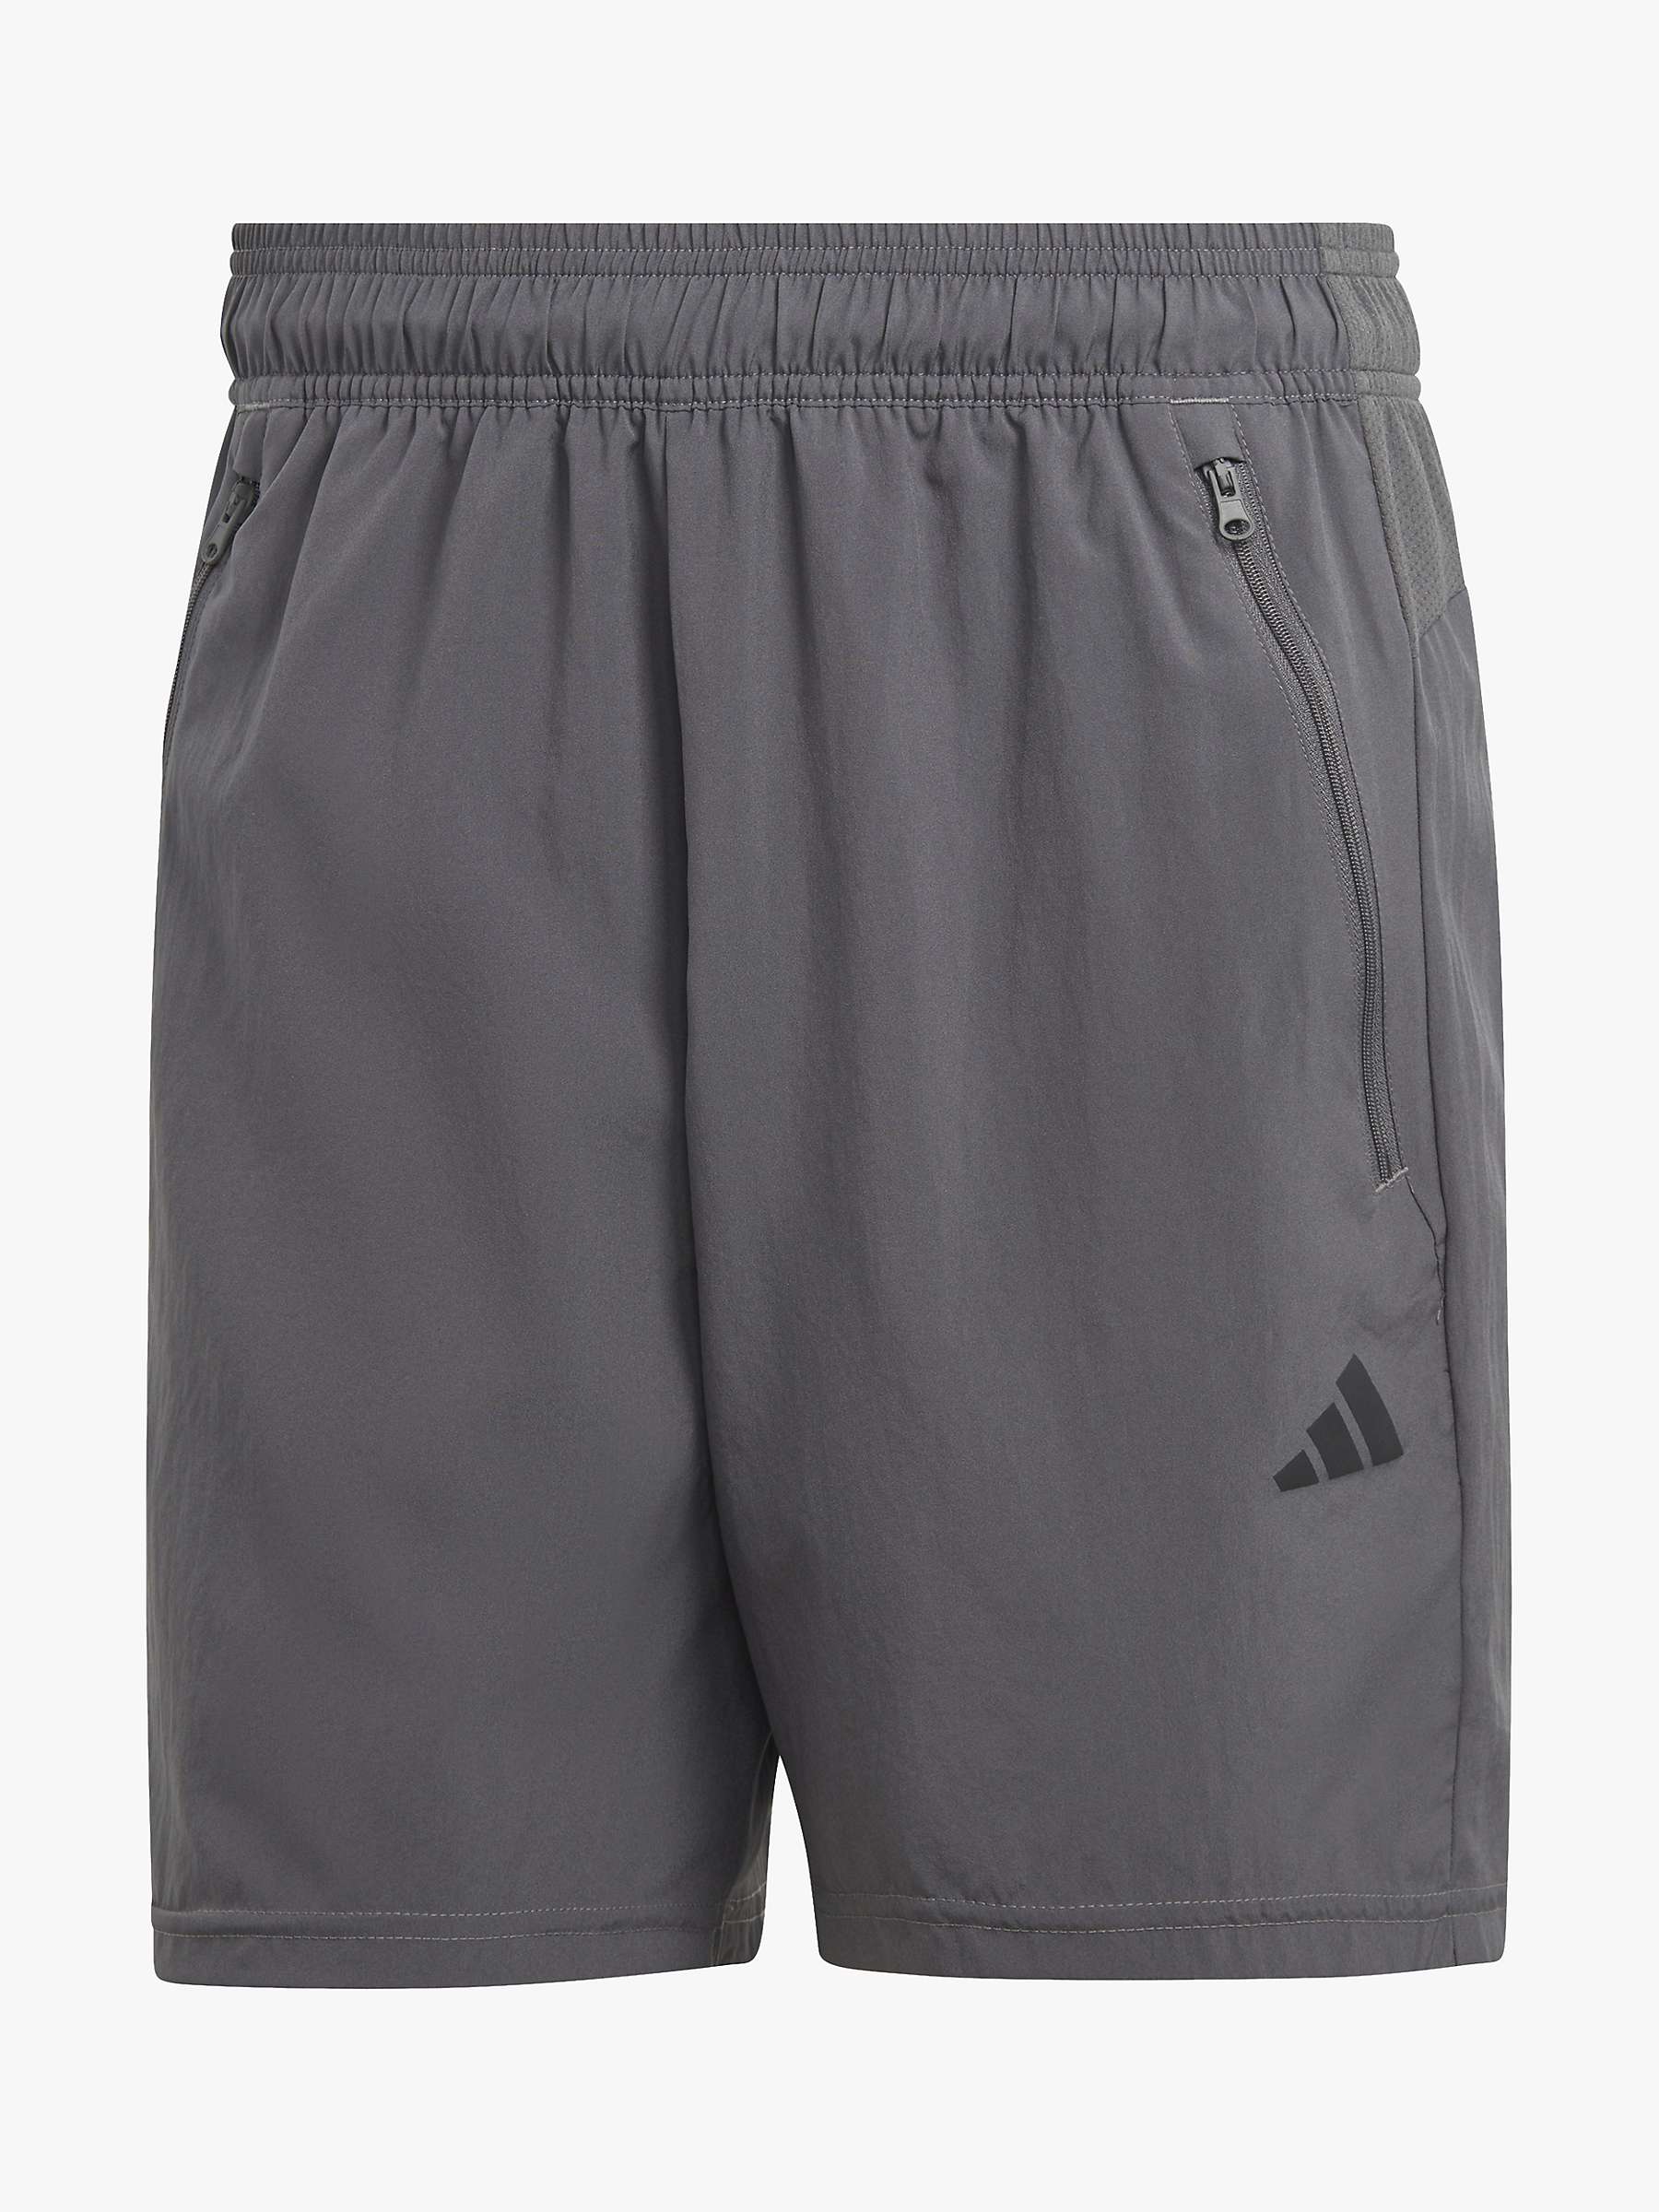 Buy adidas Train Essentials Woven Recycled Gym Shorts Online at johnlewis.com